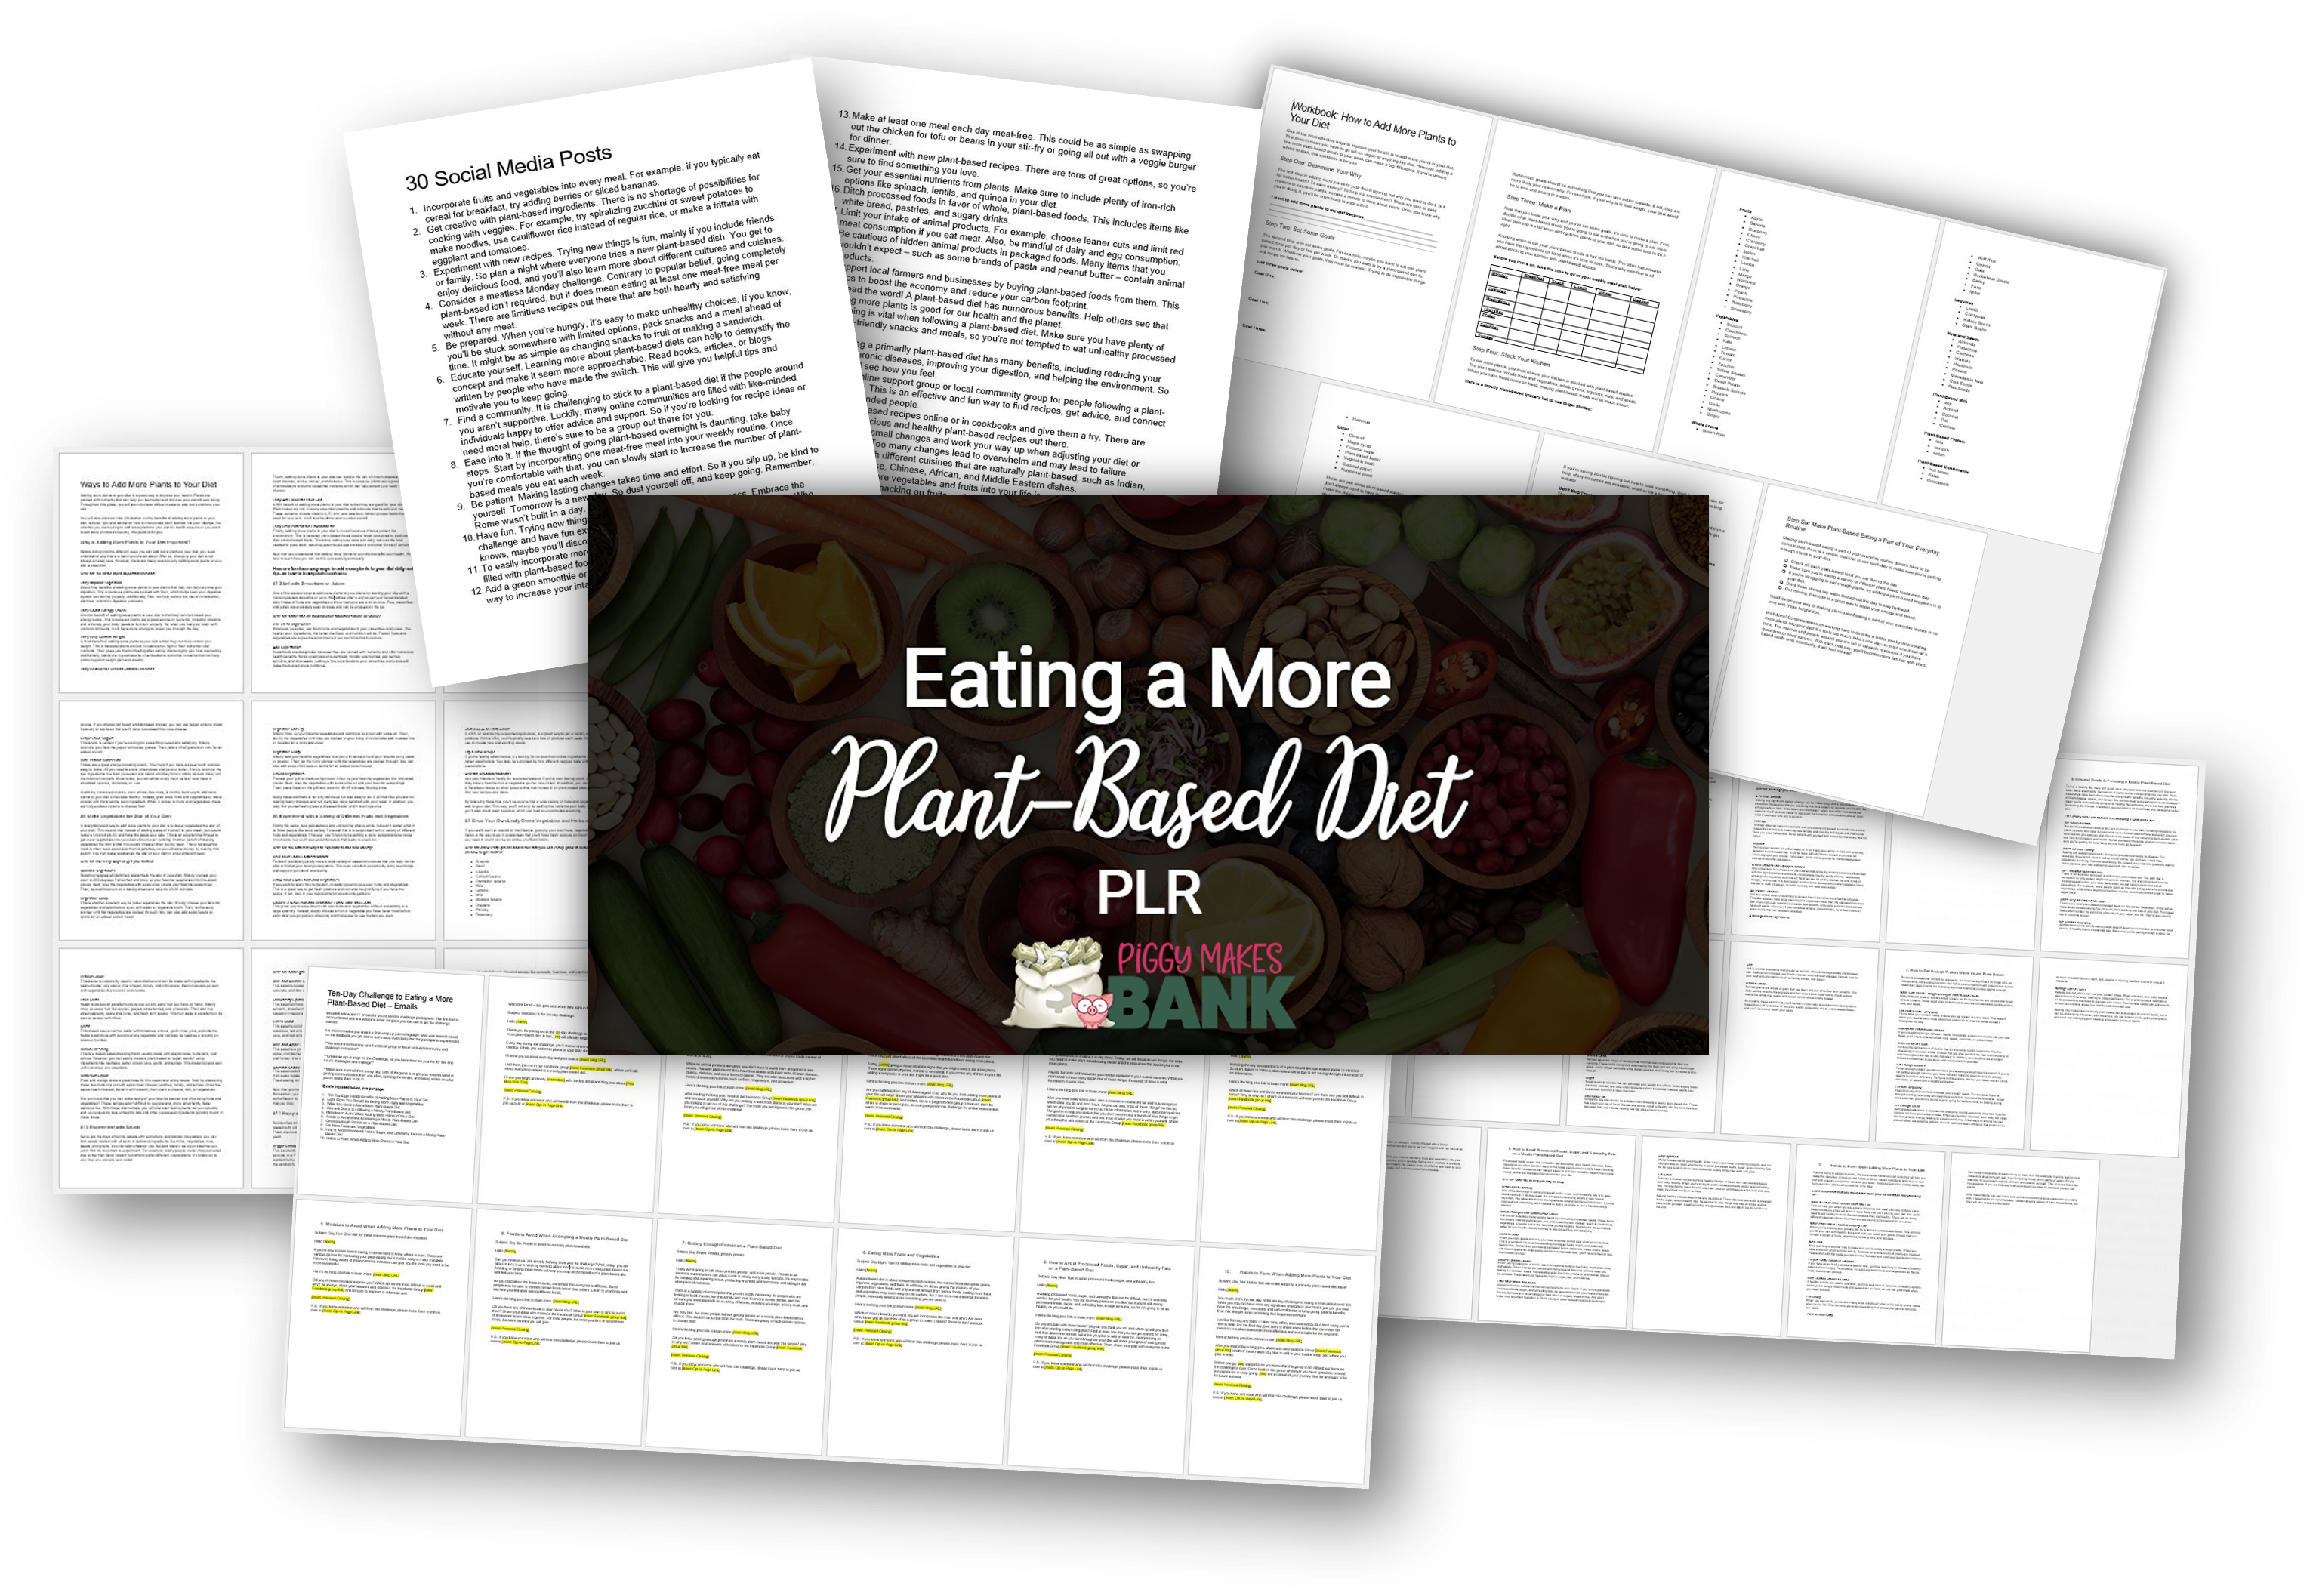 Eating a More Plant-Based Diet